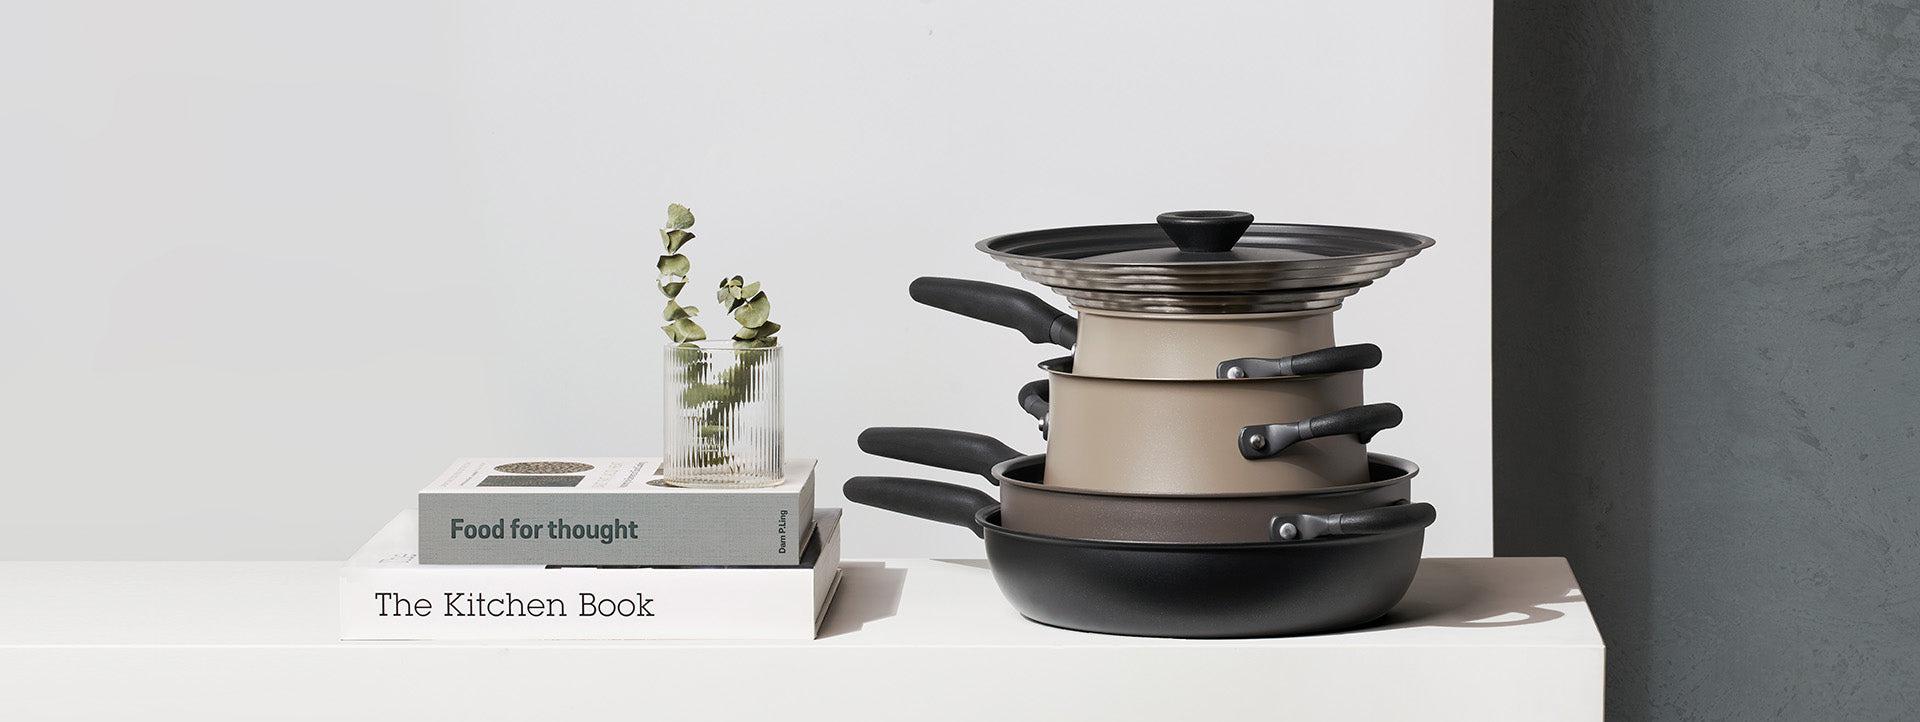 Meyer Cookware Cinder and Smoke cookware set displayed on white table with books and vase